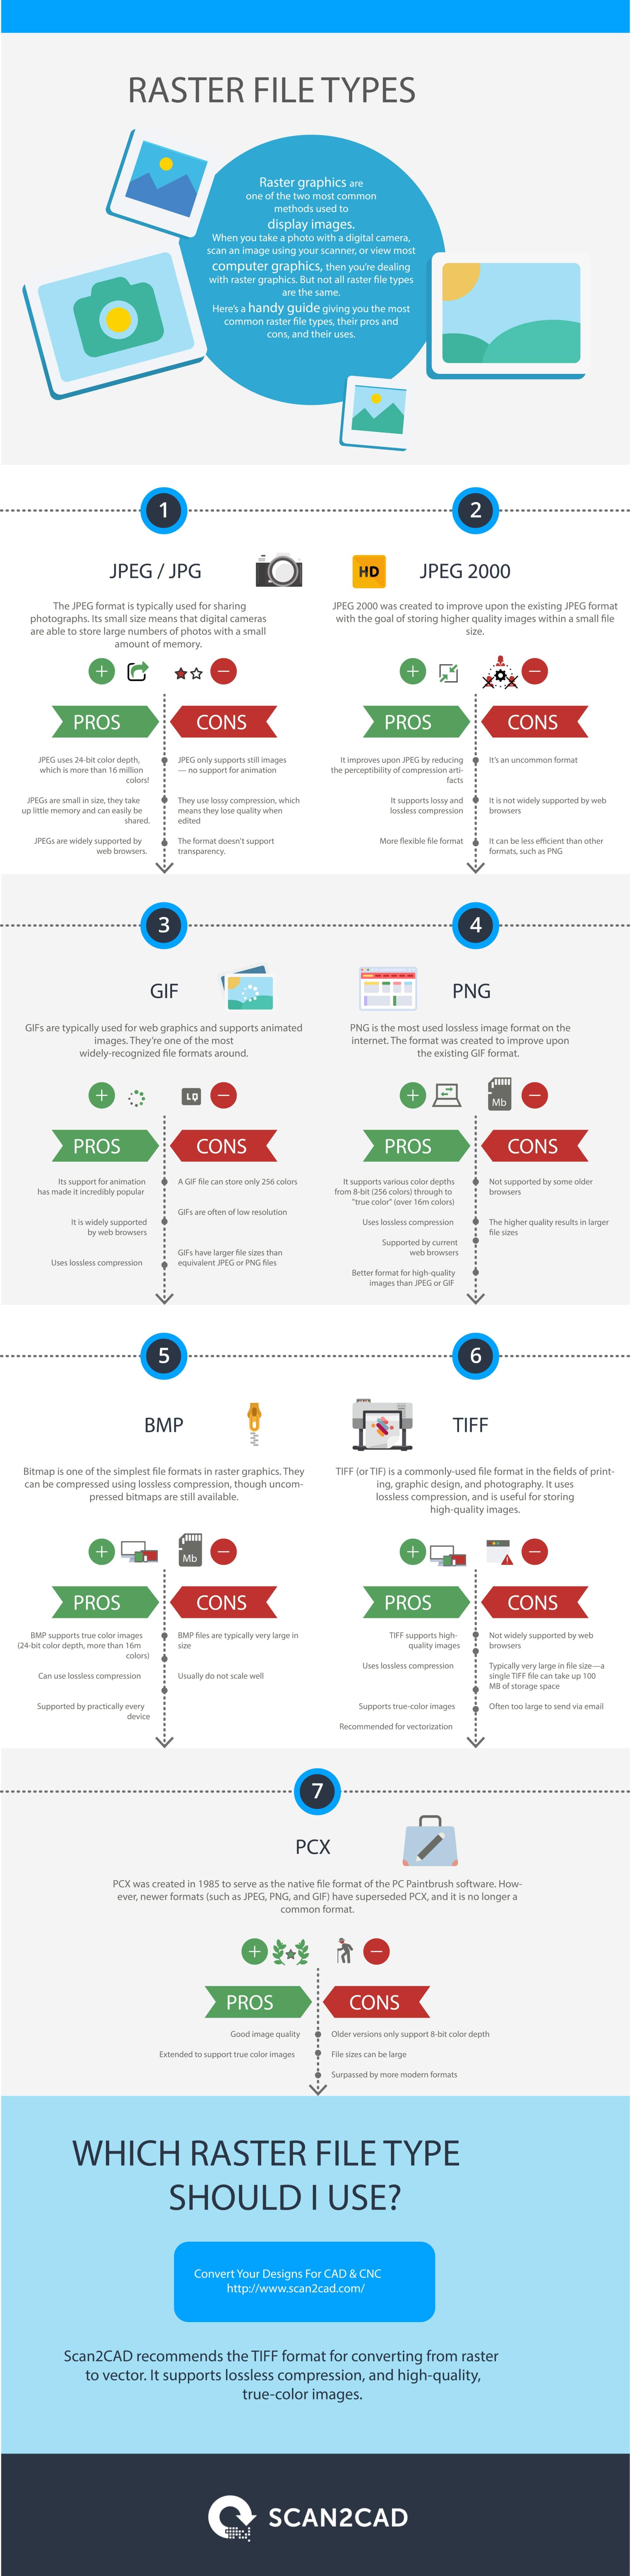 Infographic on raster file types